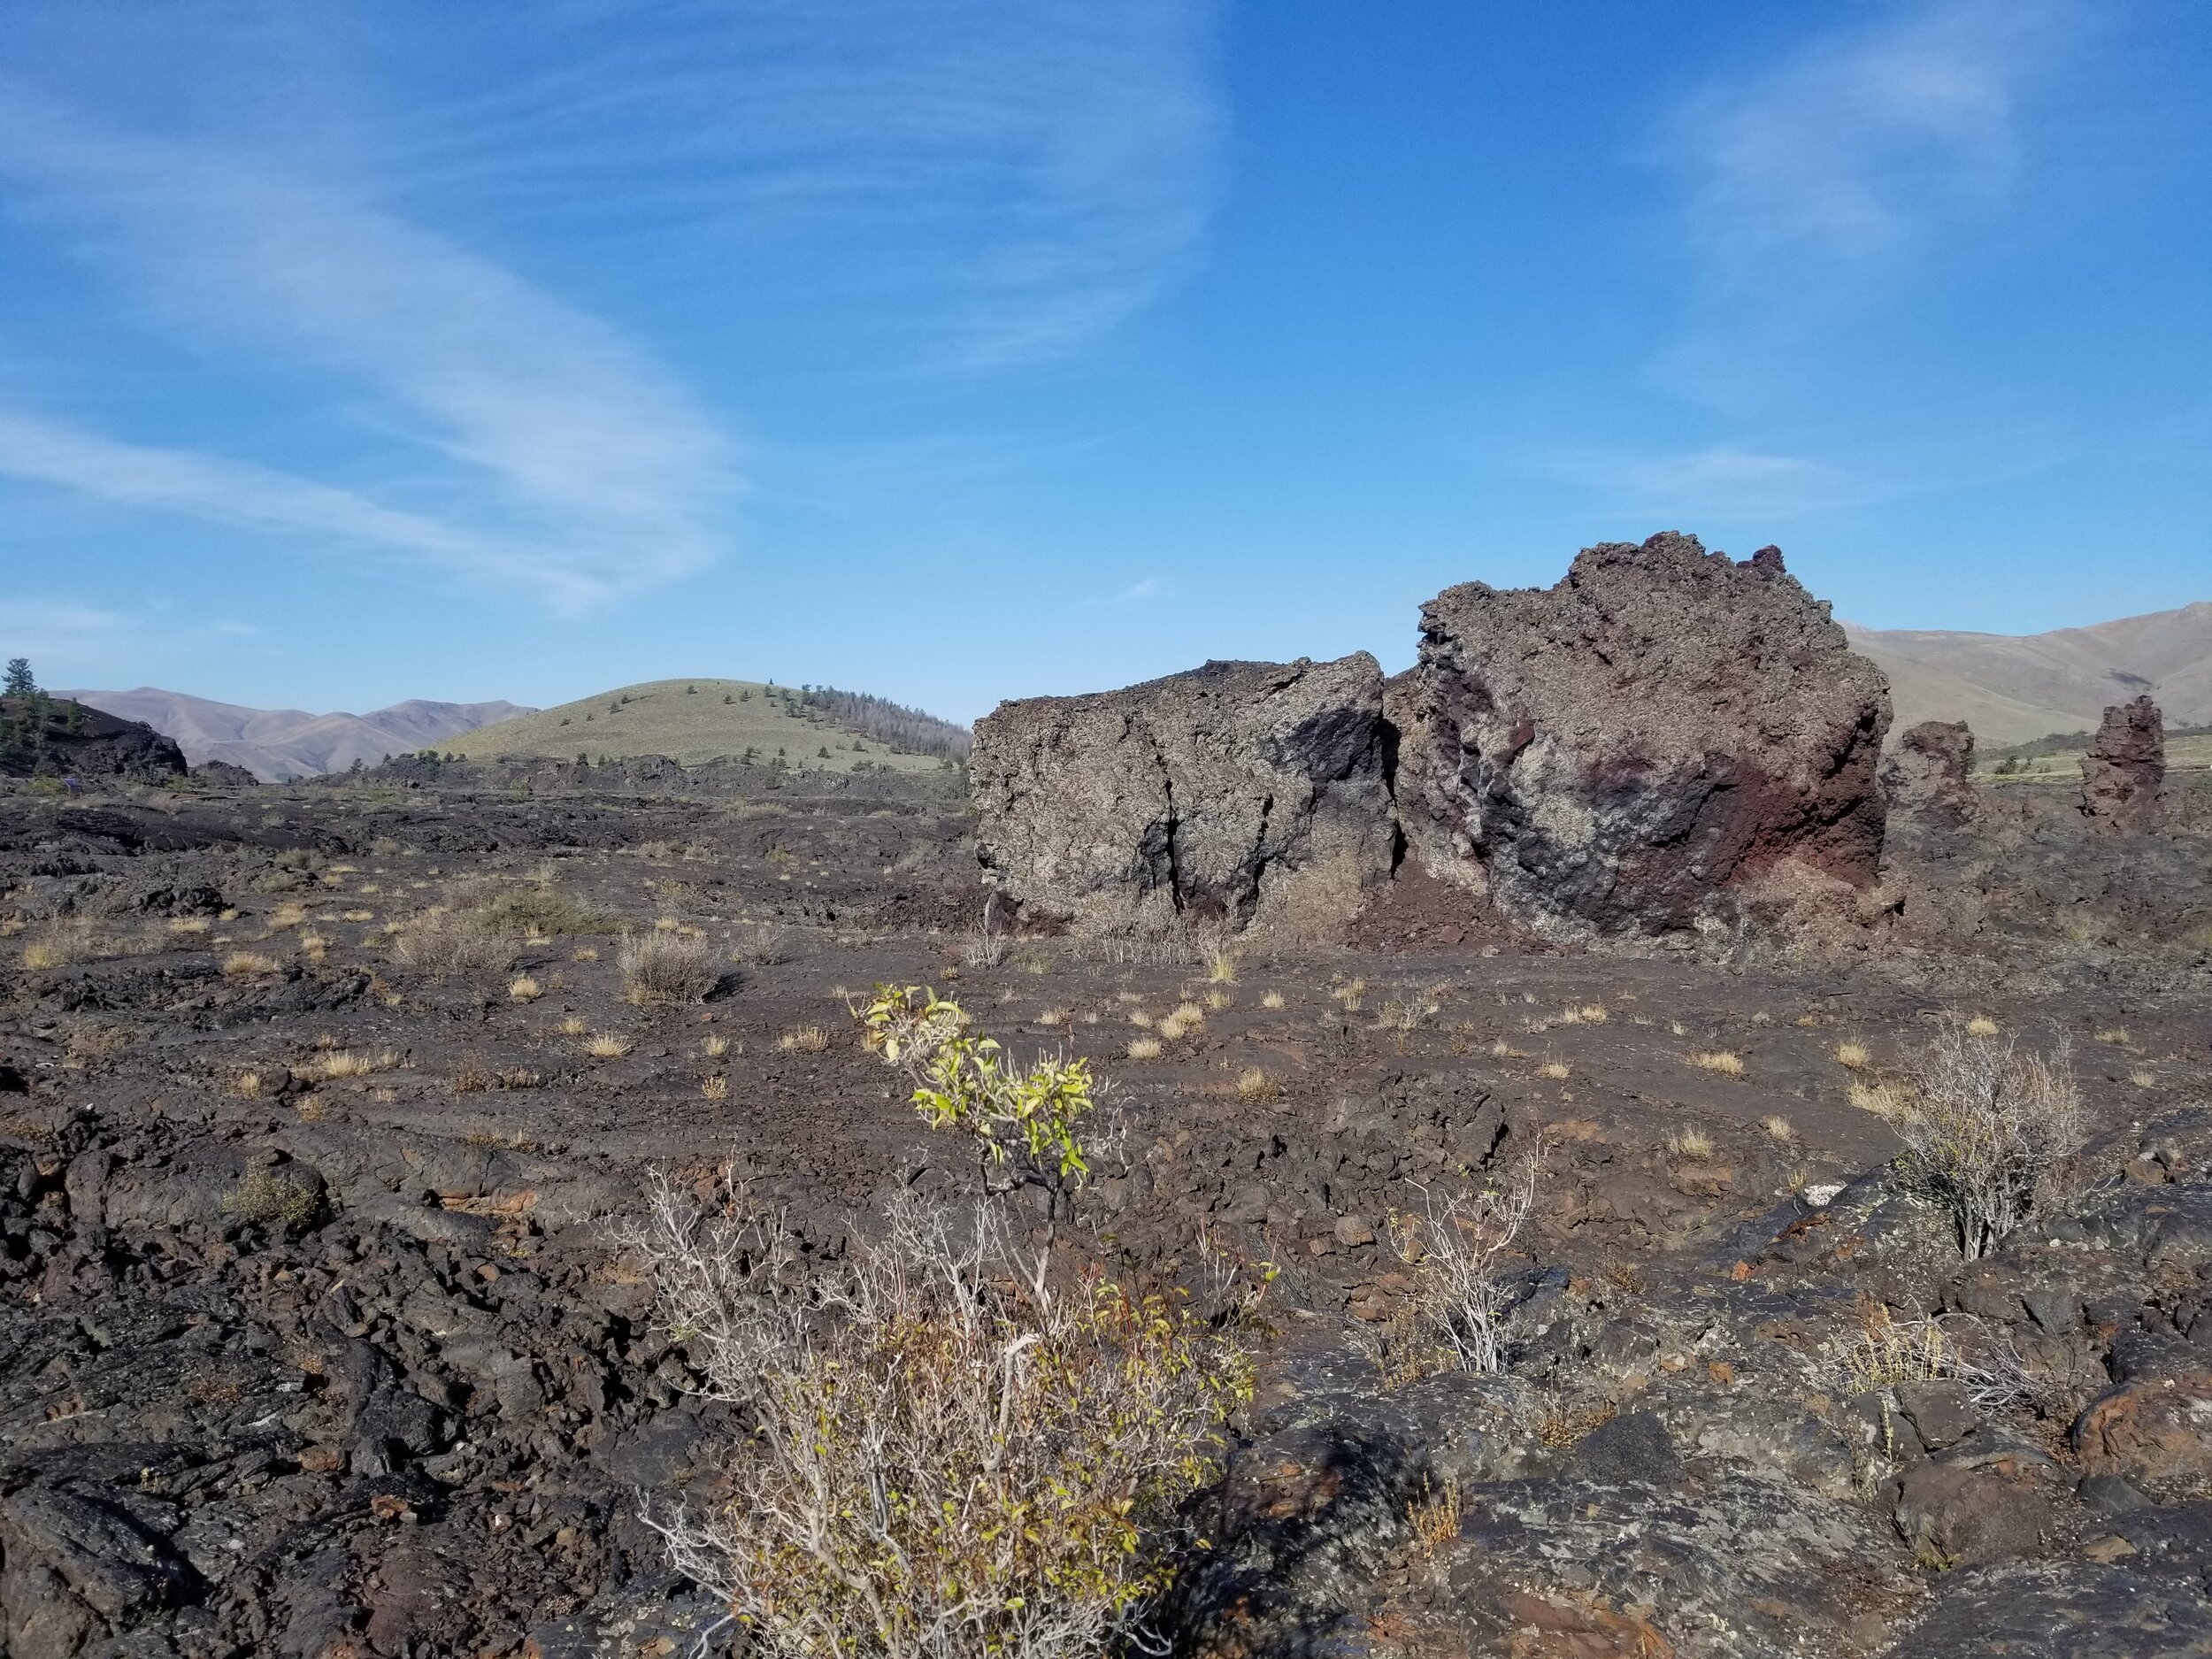 4 Things To Do at Craters of the Moon